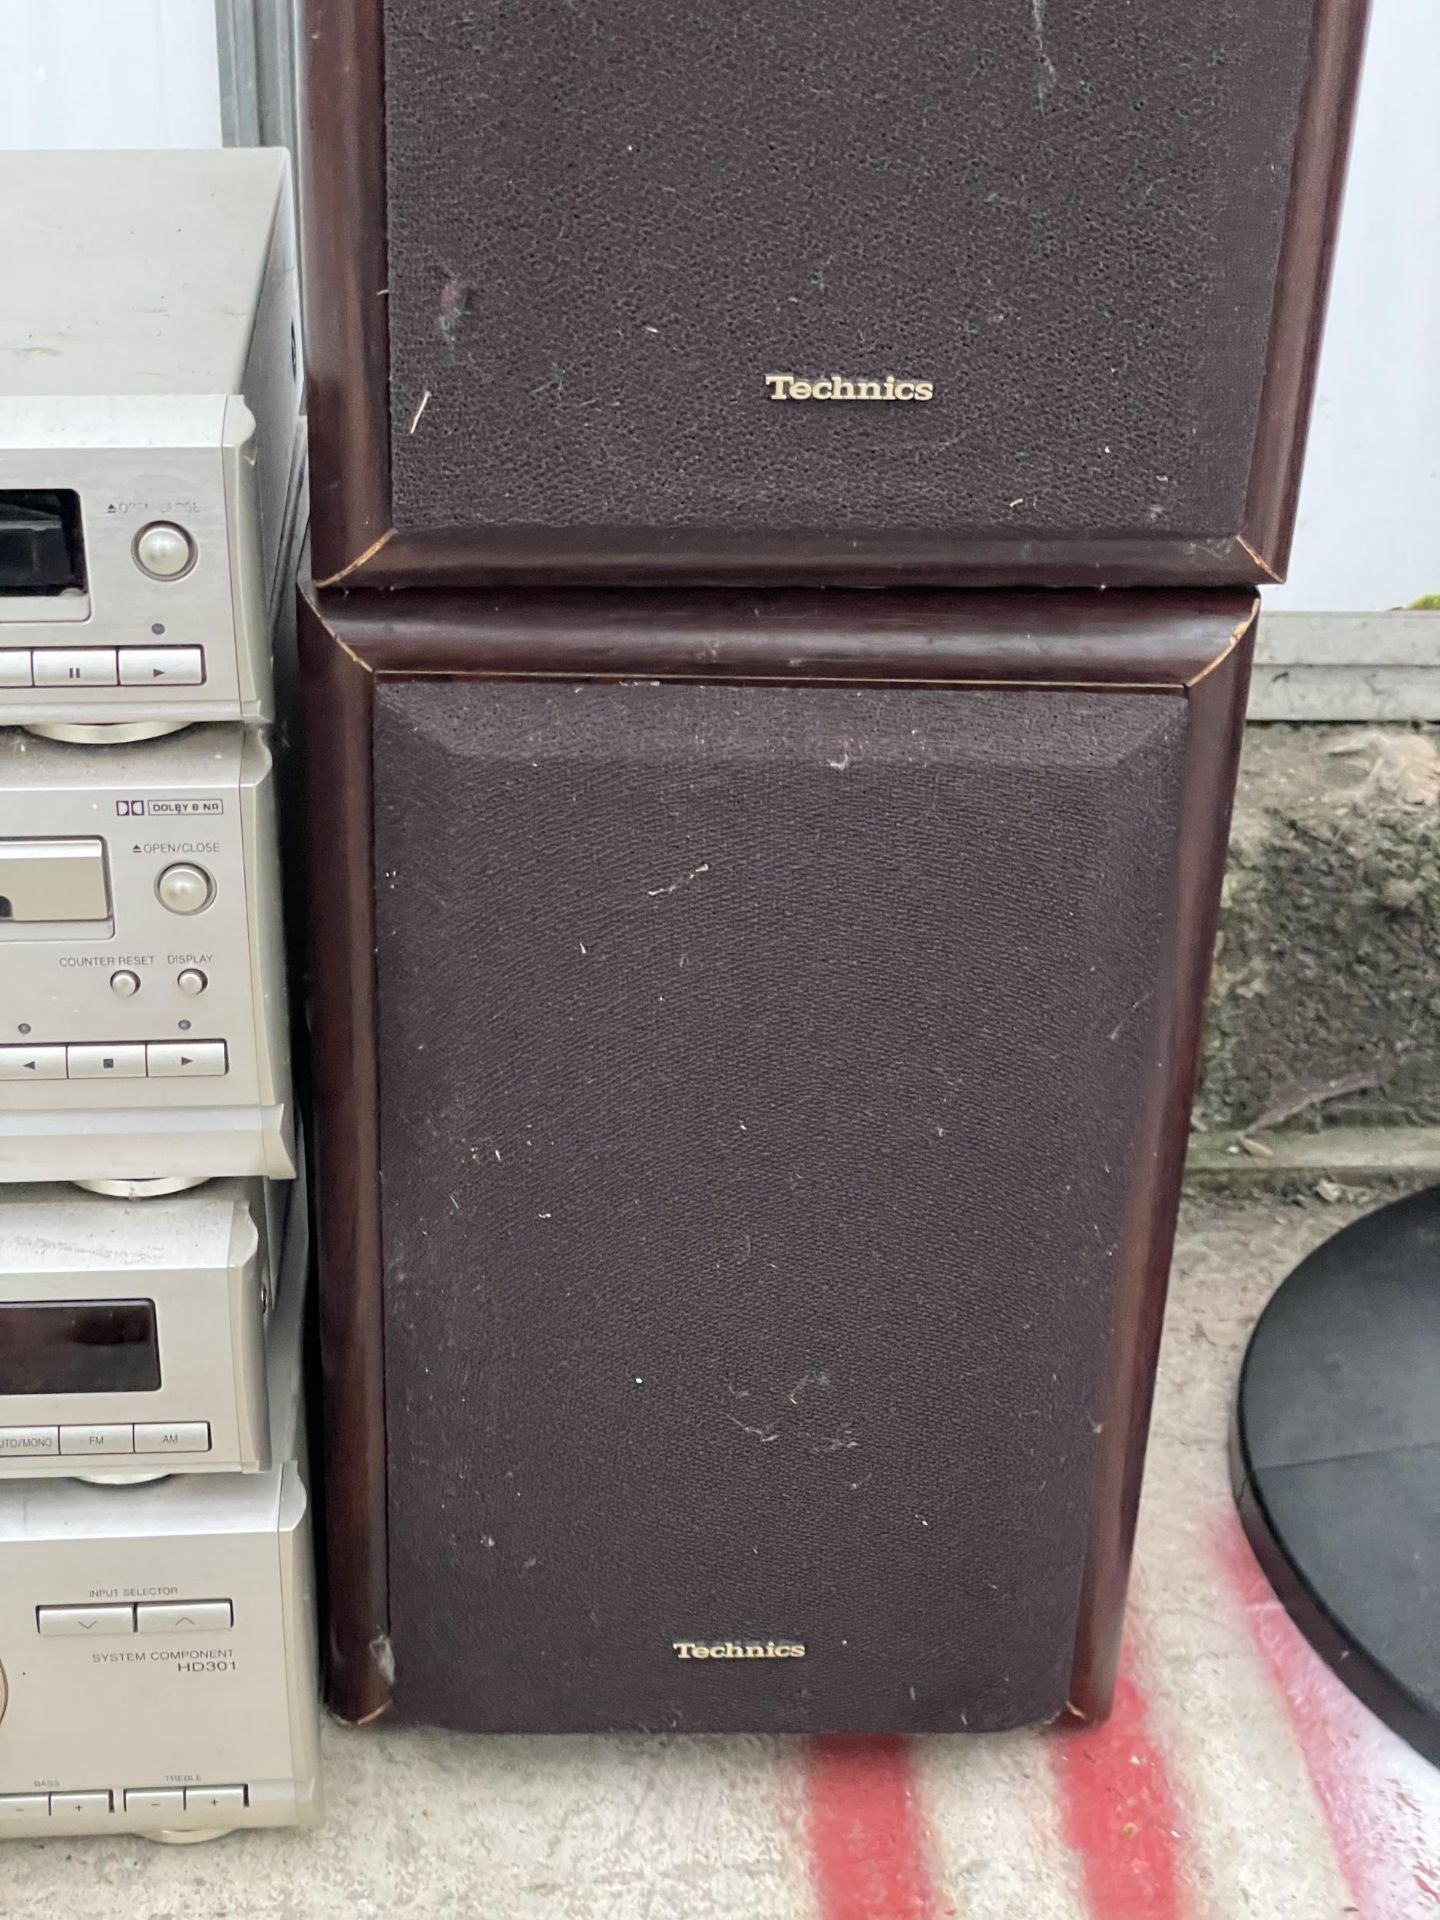 A TECHNICS STEREO SYSTEM WITH SPEAKERS - Image 3 of 3